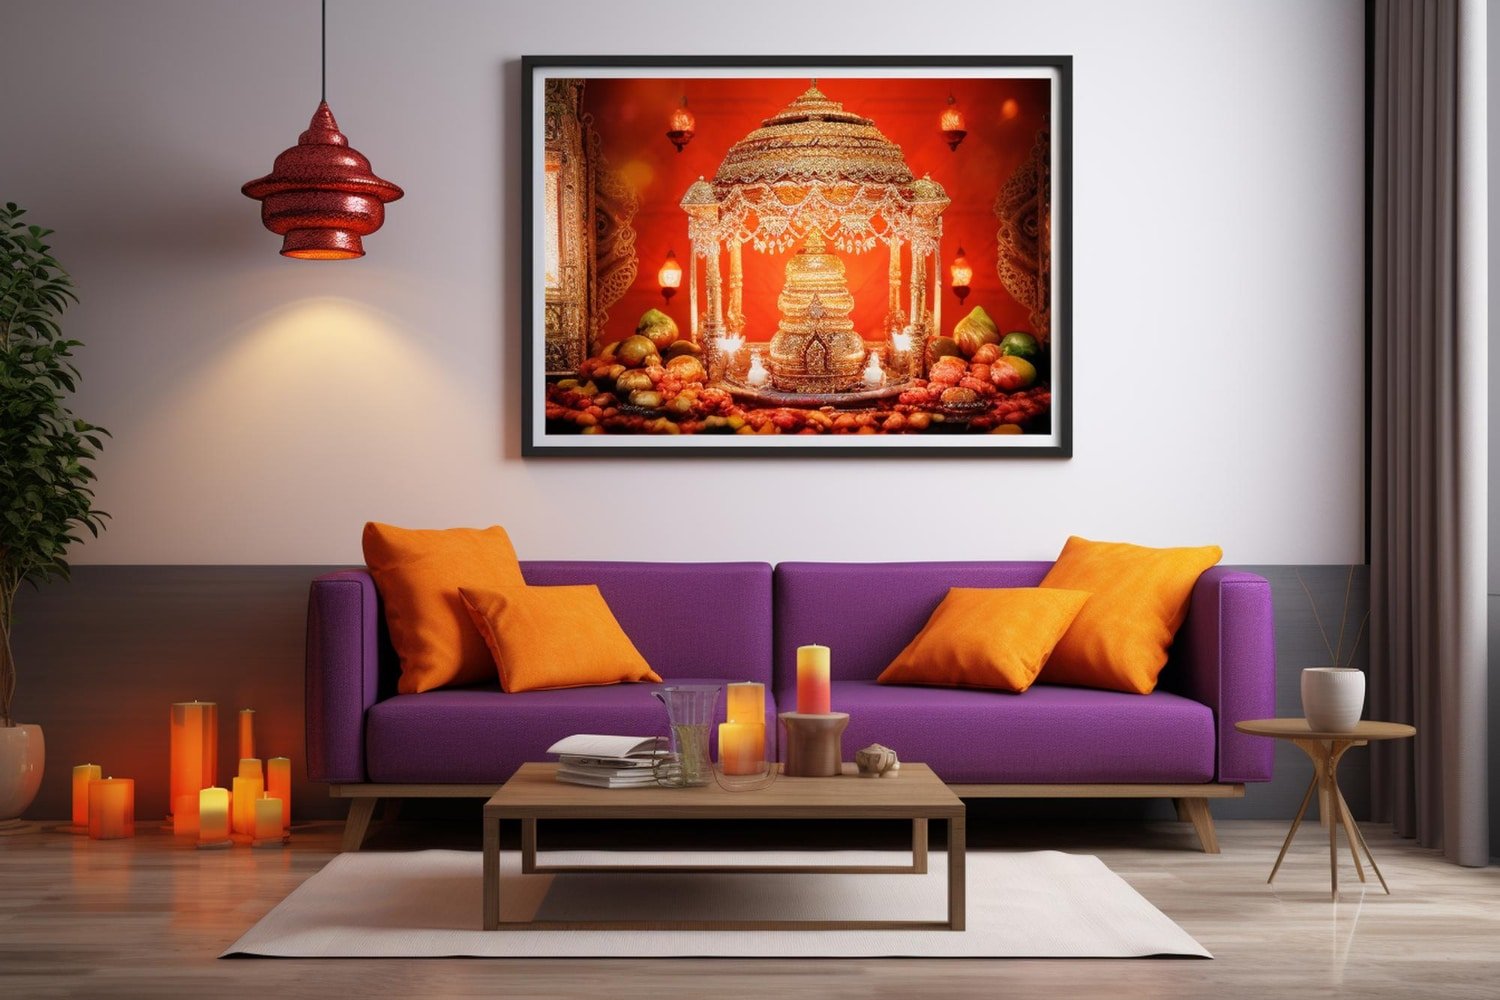 You are currently viewing Decorate Your Home With Oilo Studio’s Modern Home Decor